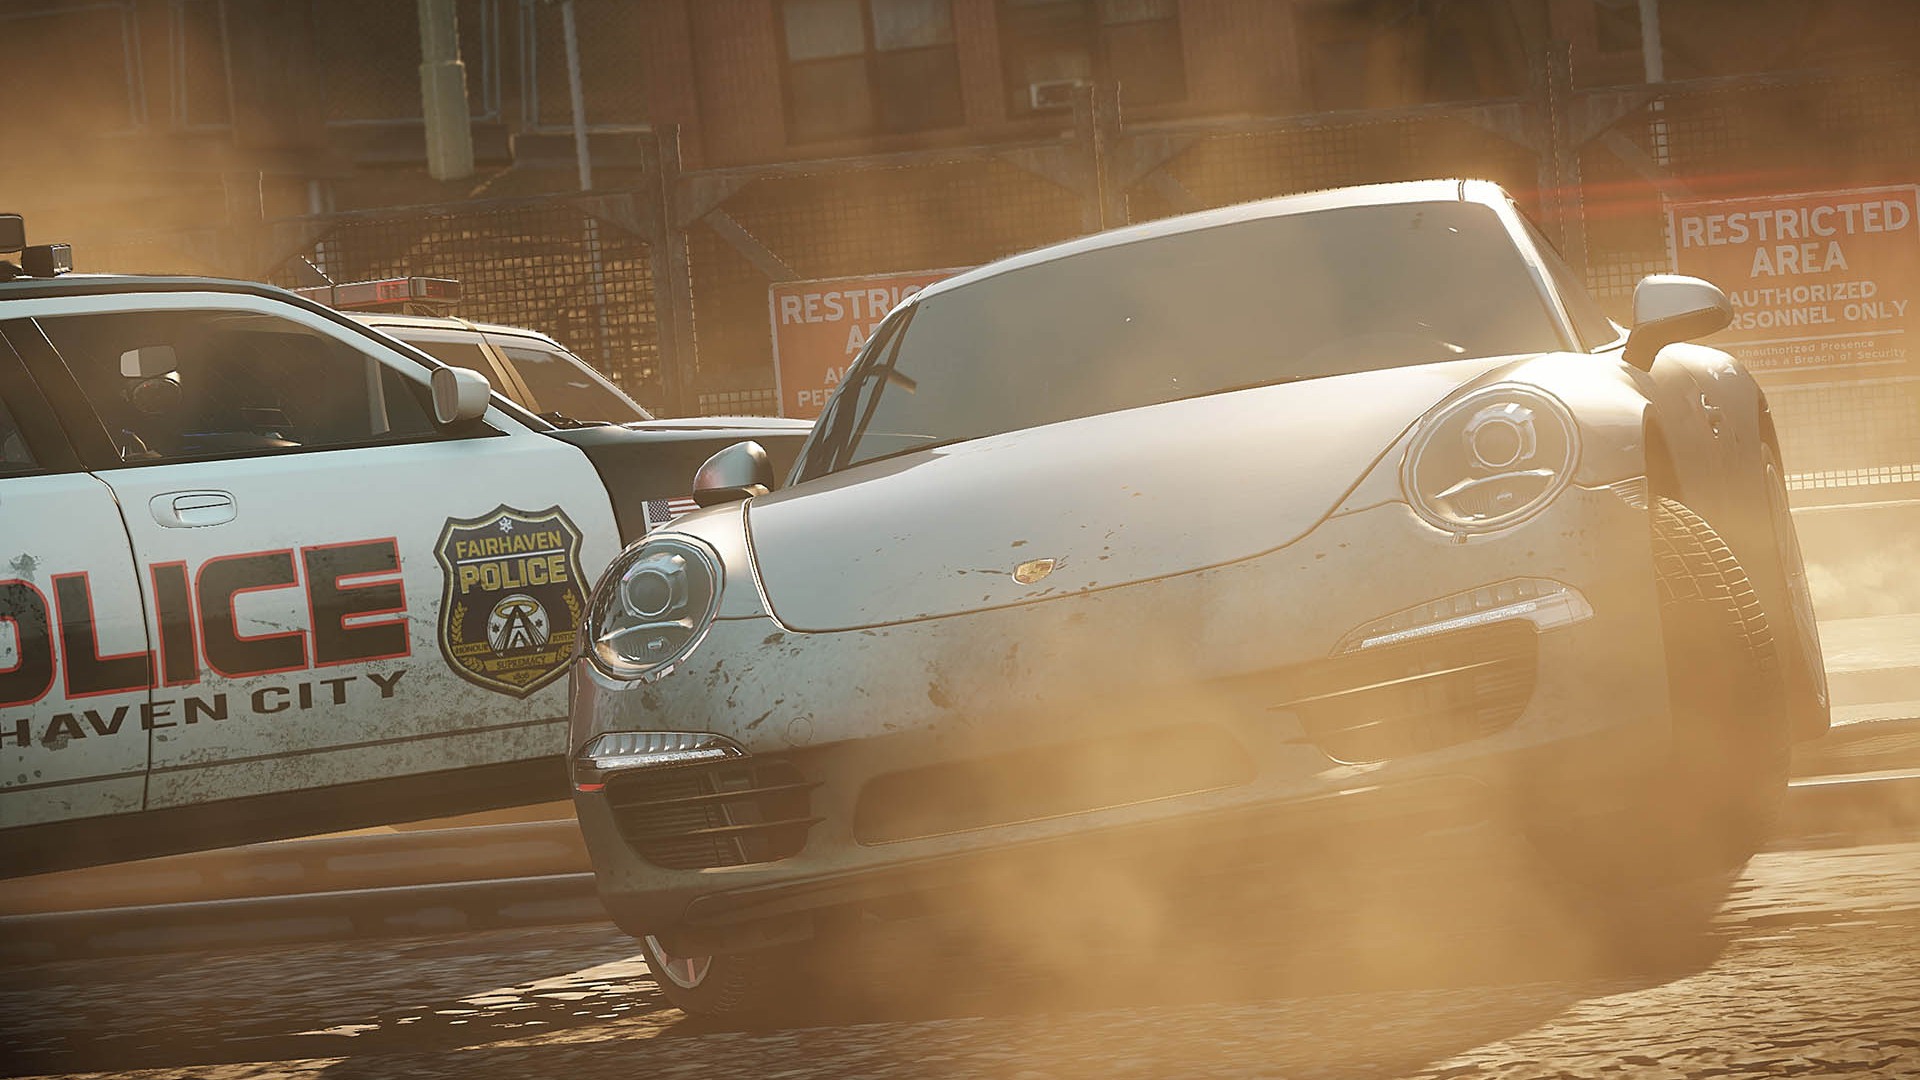 Need for Speed: Most Wanted 极品飞车17：最高通缉 高清壁纸13 - 1920x1080